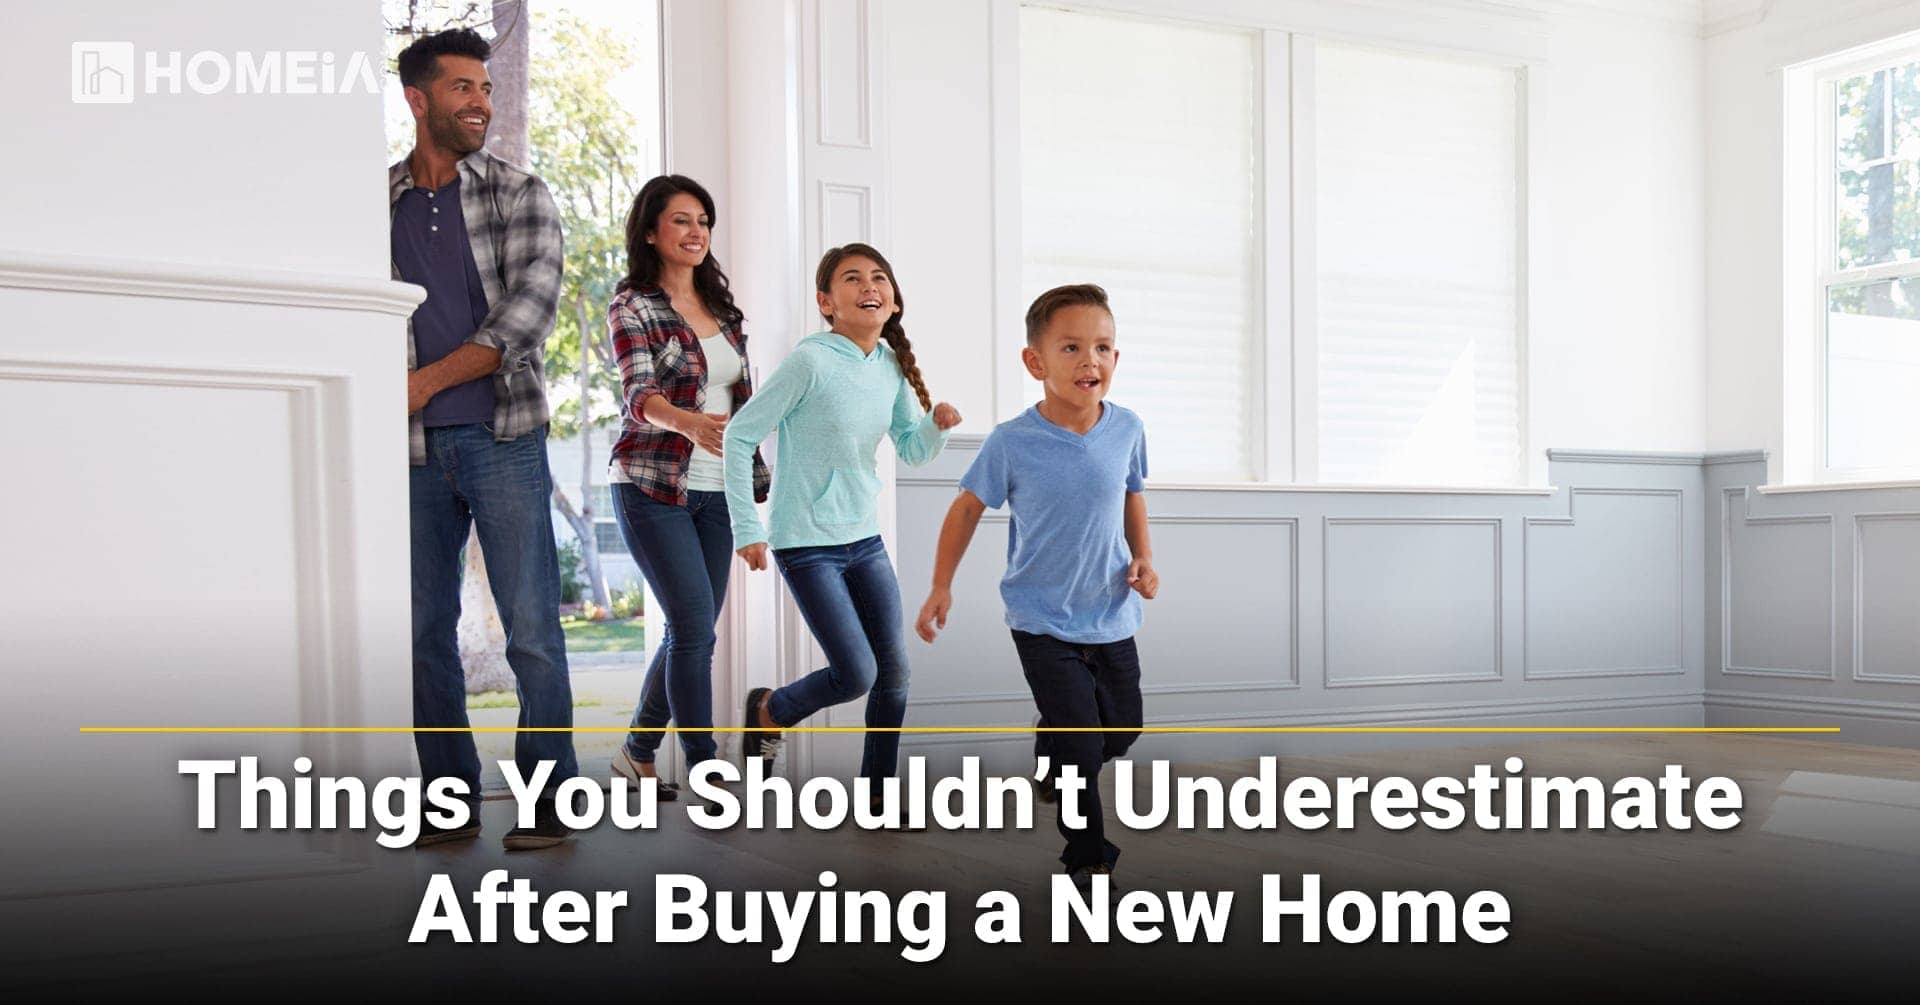 Things You Shouldn’t Underestimate After Buying a New Home